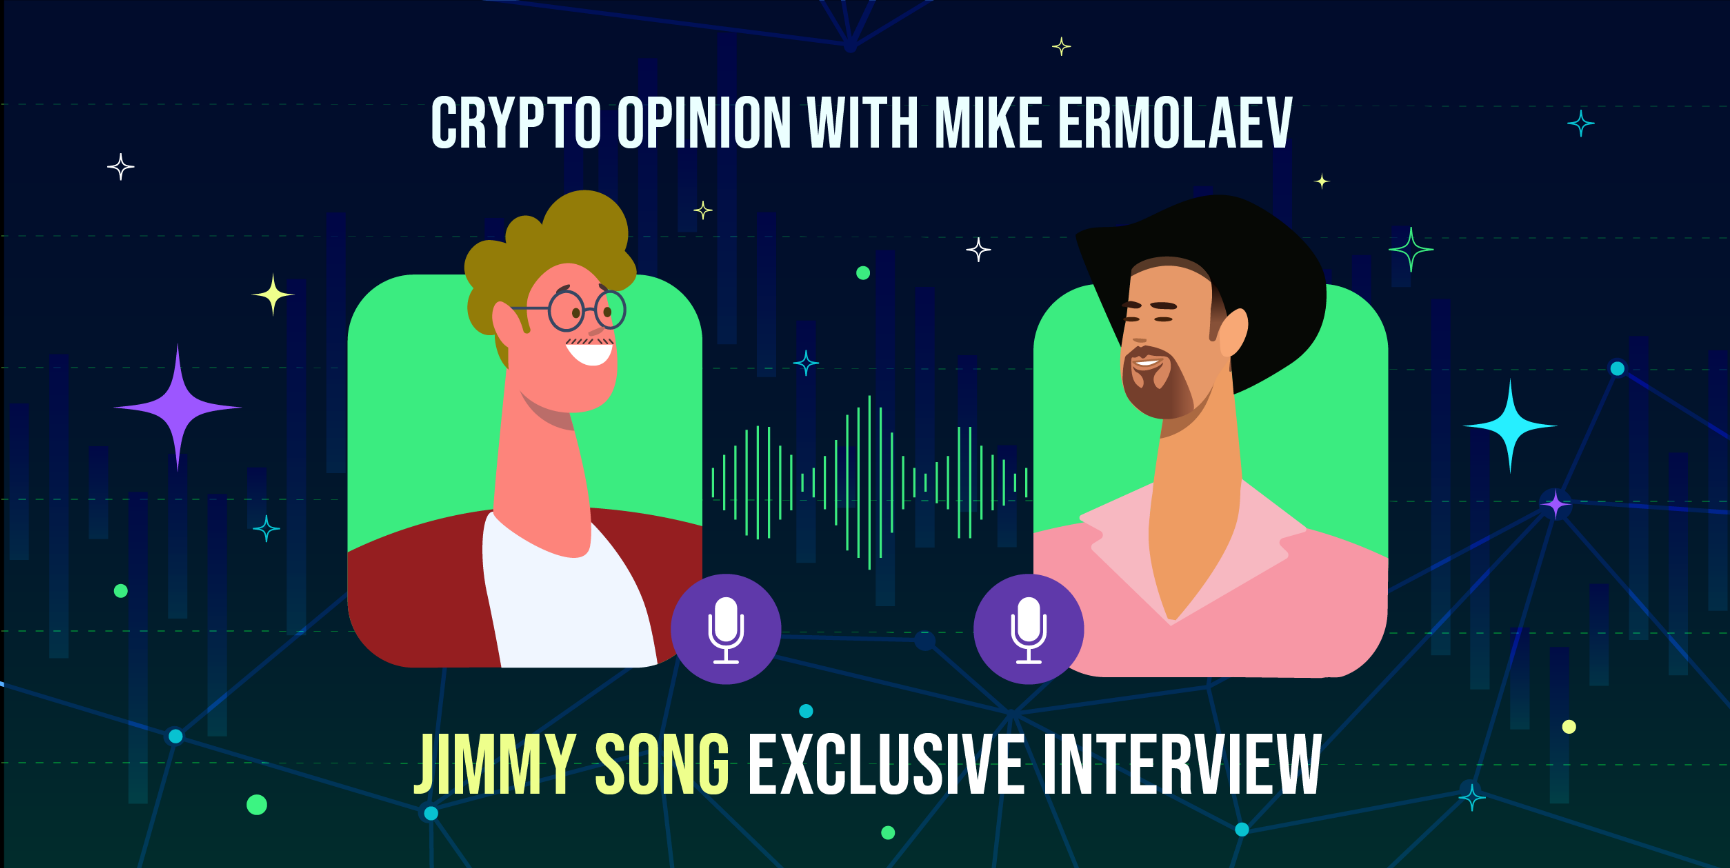 Crypto Opinion with Mike Ermolaev. Jimmy Song